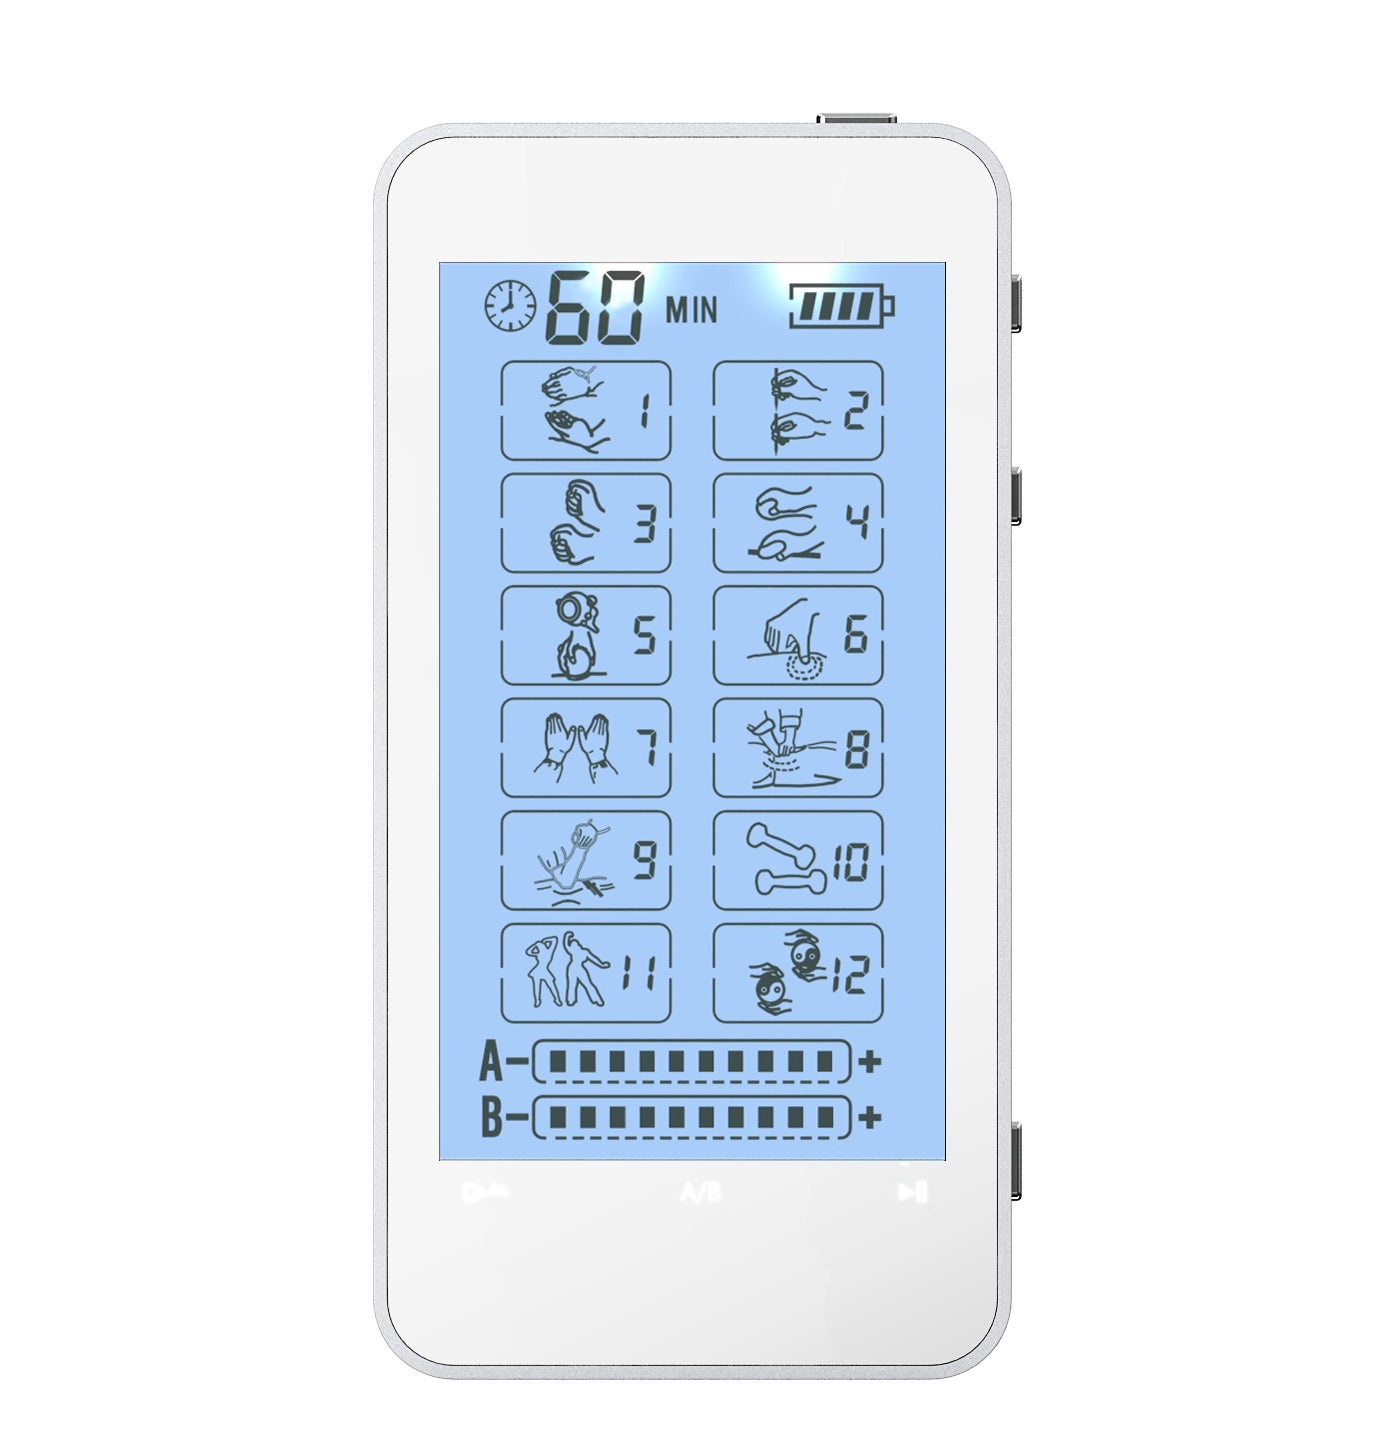 T12AB FDA Cleared 12 mode Touch Screen Pain Relief TENS UNIT - 2 Year Warranty - HealthmateForever.com